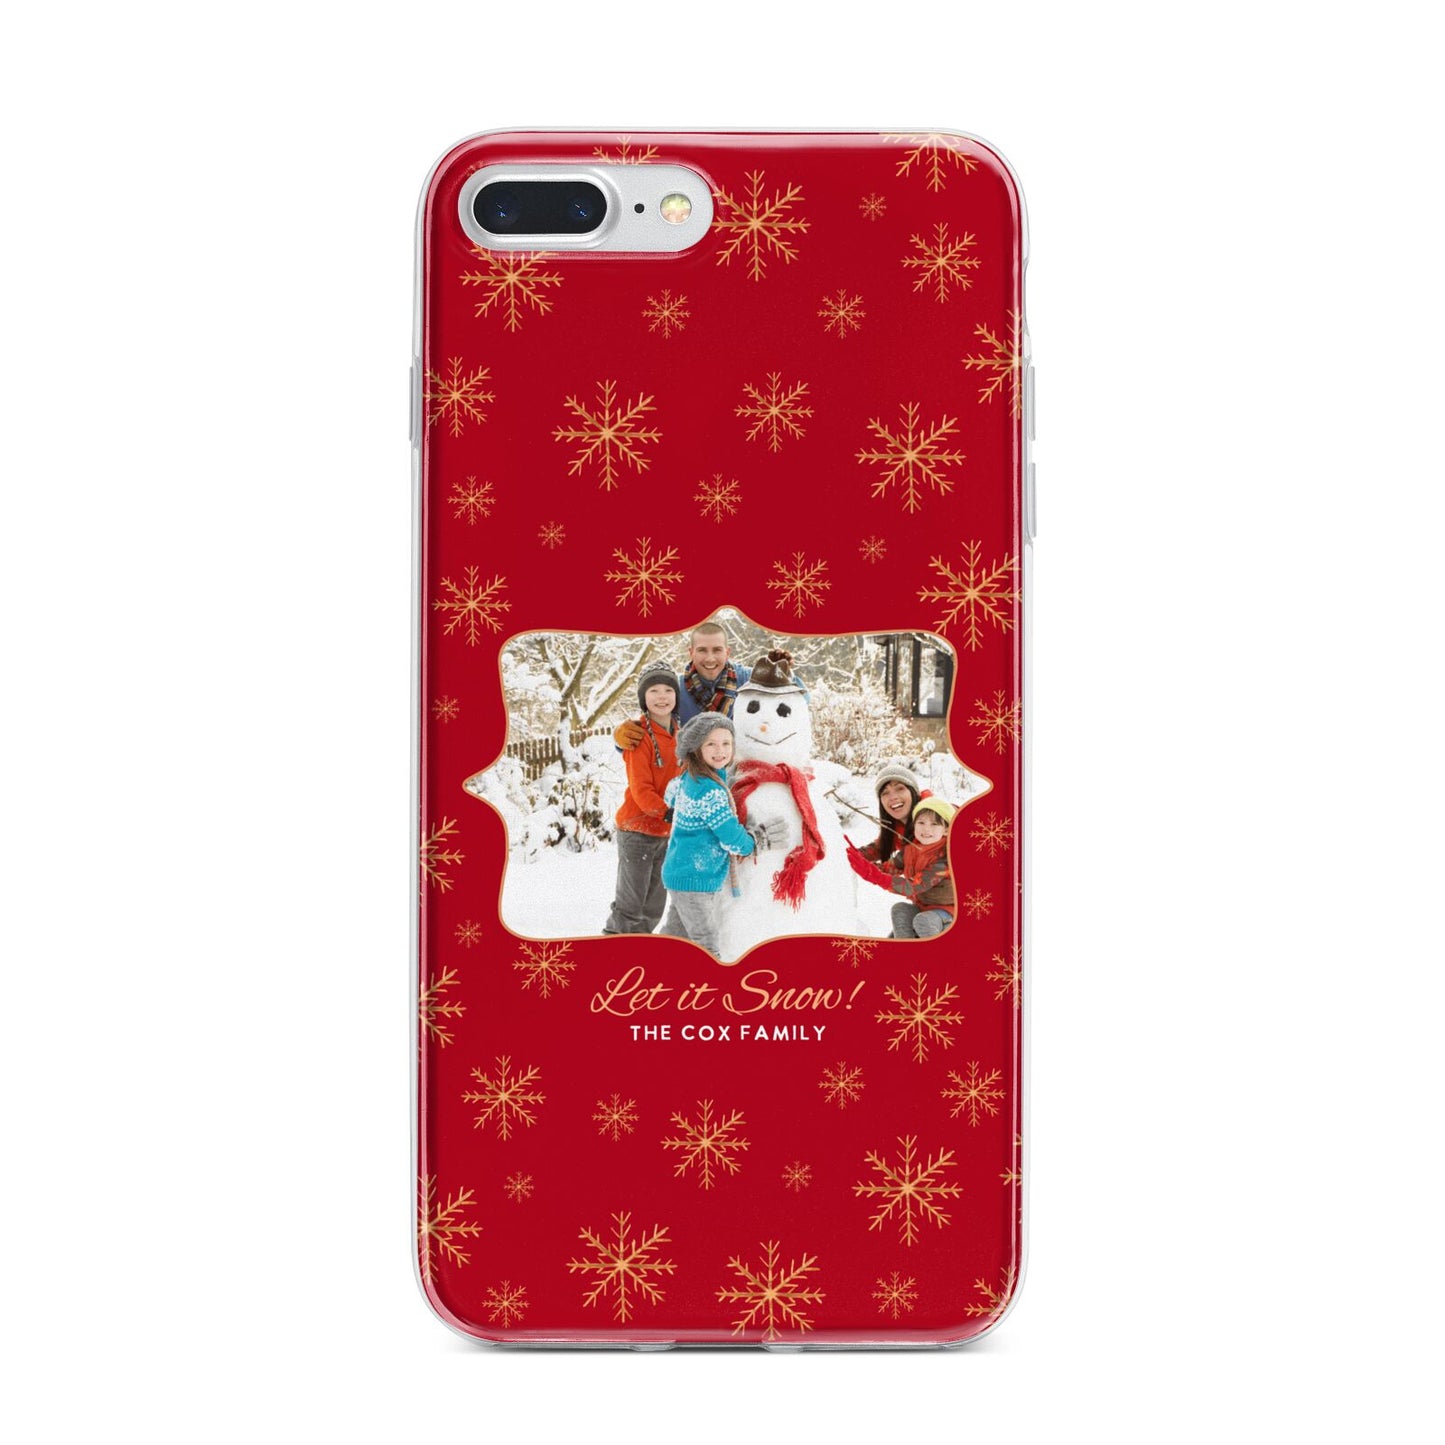 Let it Snow Christmas Photo Upload iPhone 7 Plus Bumper Case on Silver iPhone